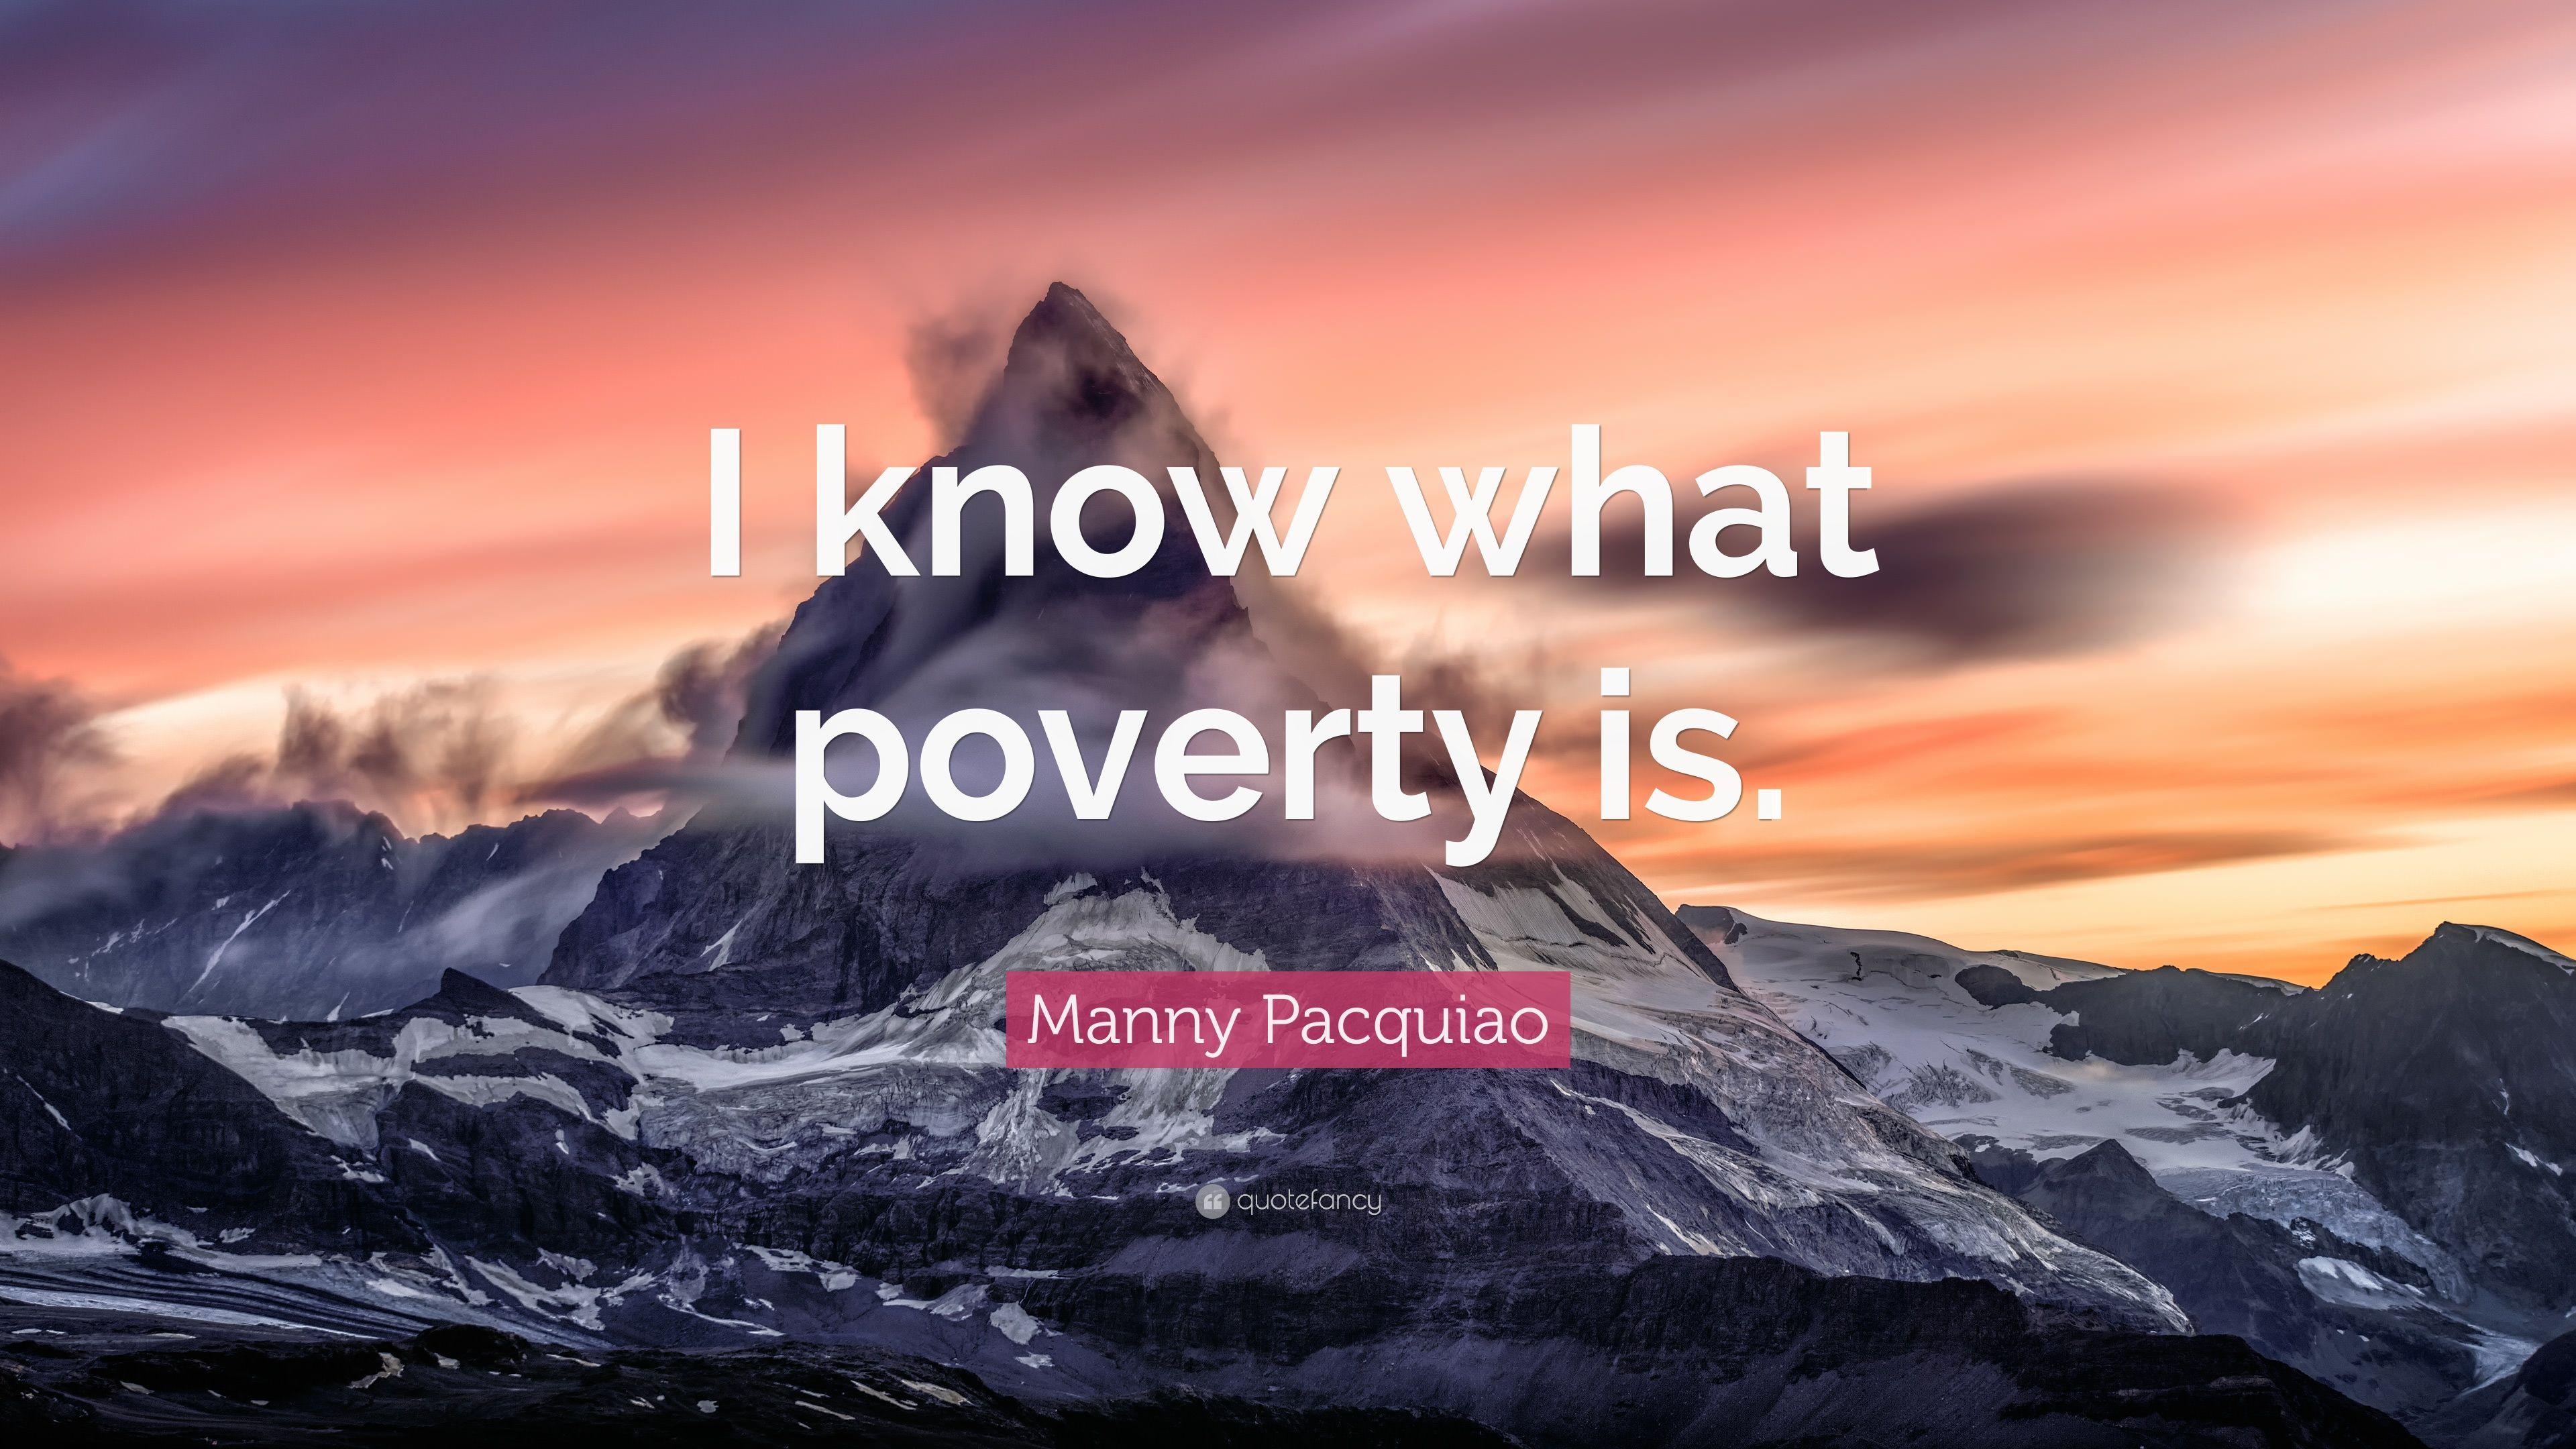 Manny Pacquiao Quote: “I know what poverty is.” 10 wallpaper